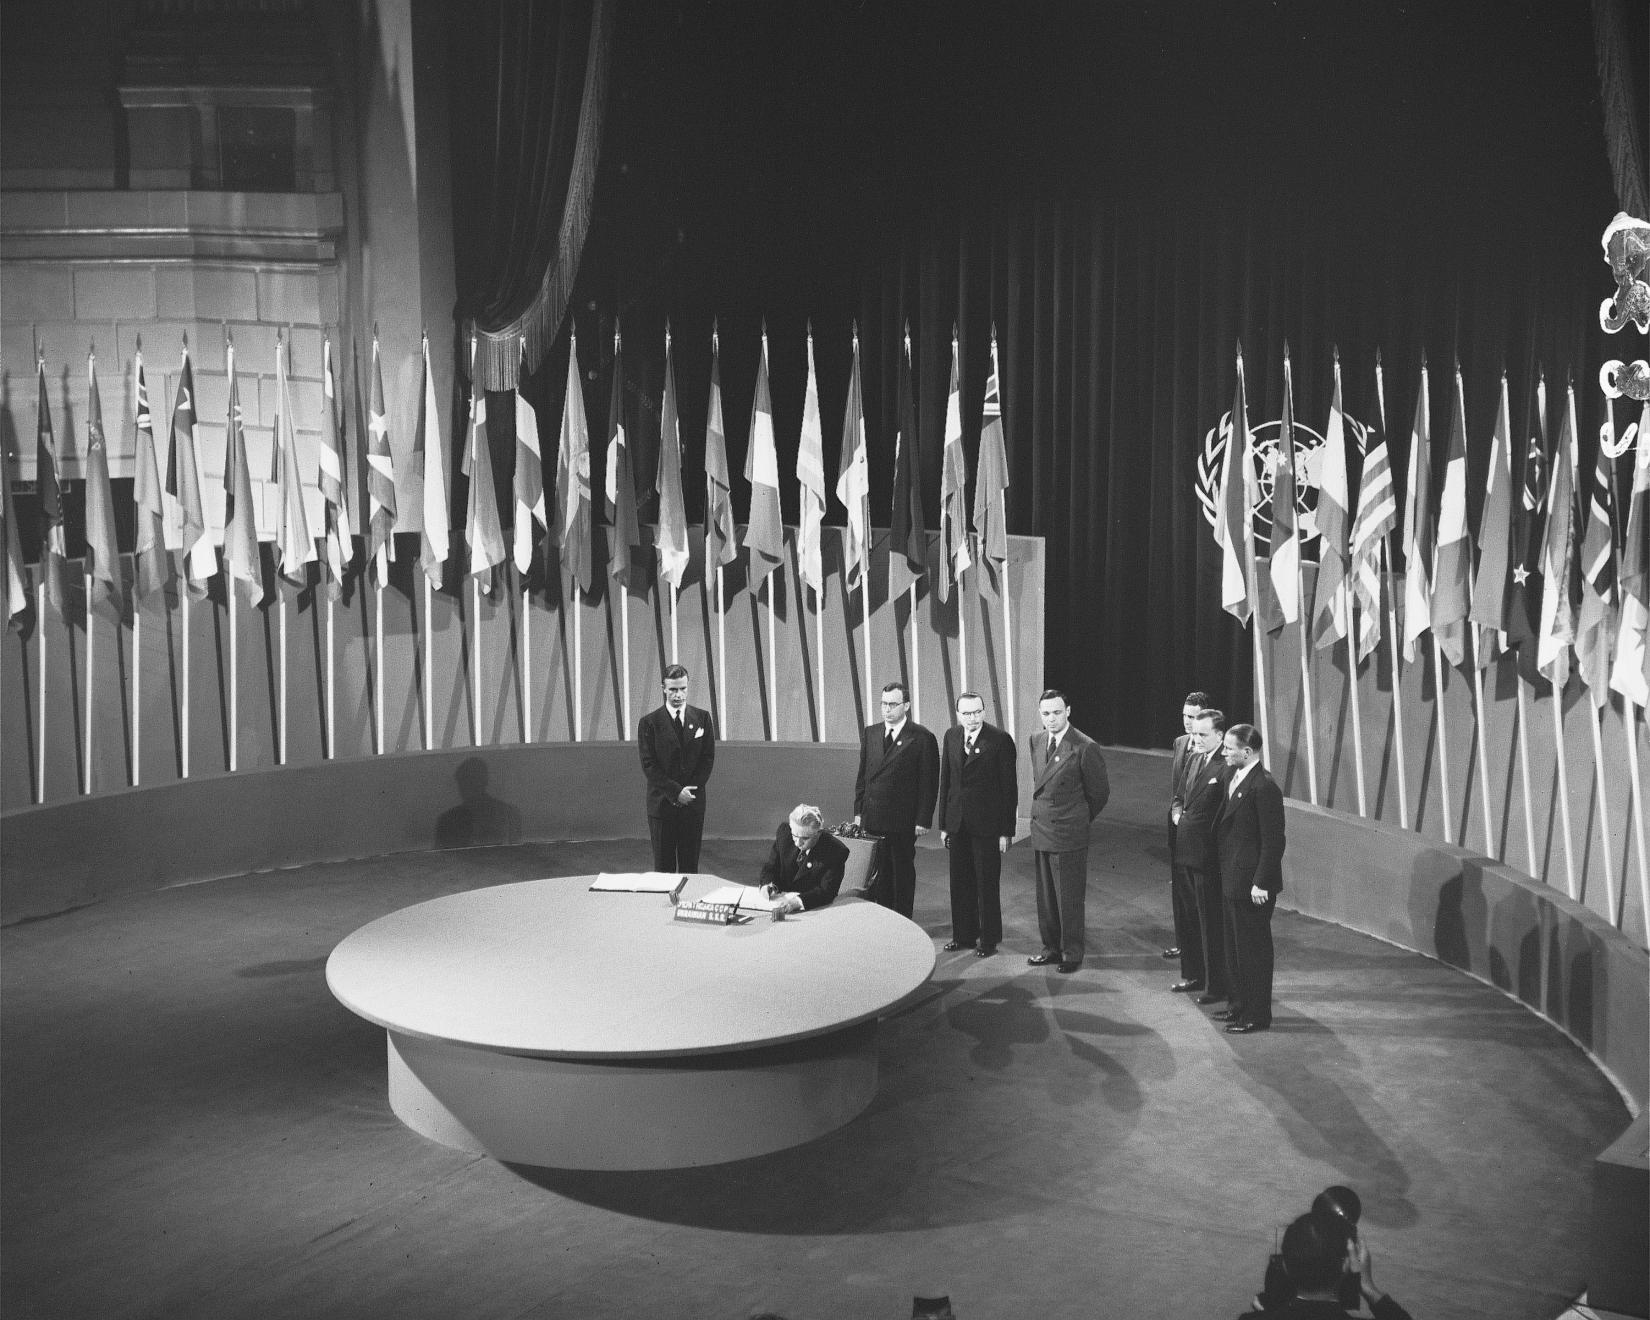 The signing ceremony of the UN Charter in San Francisco